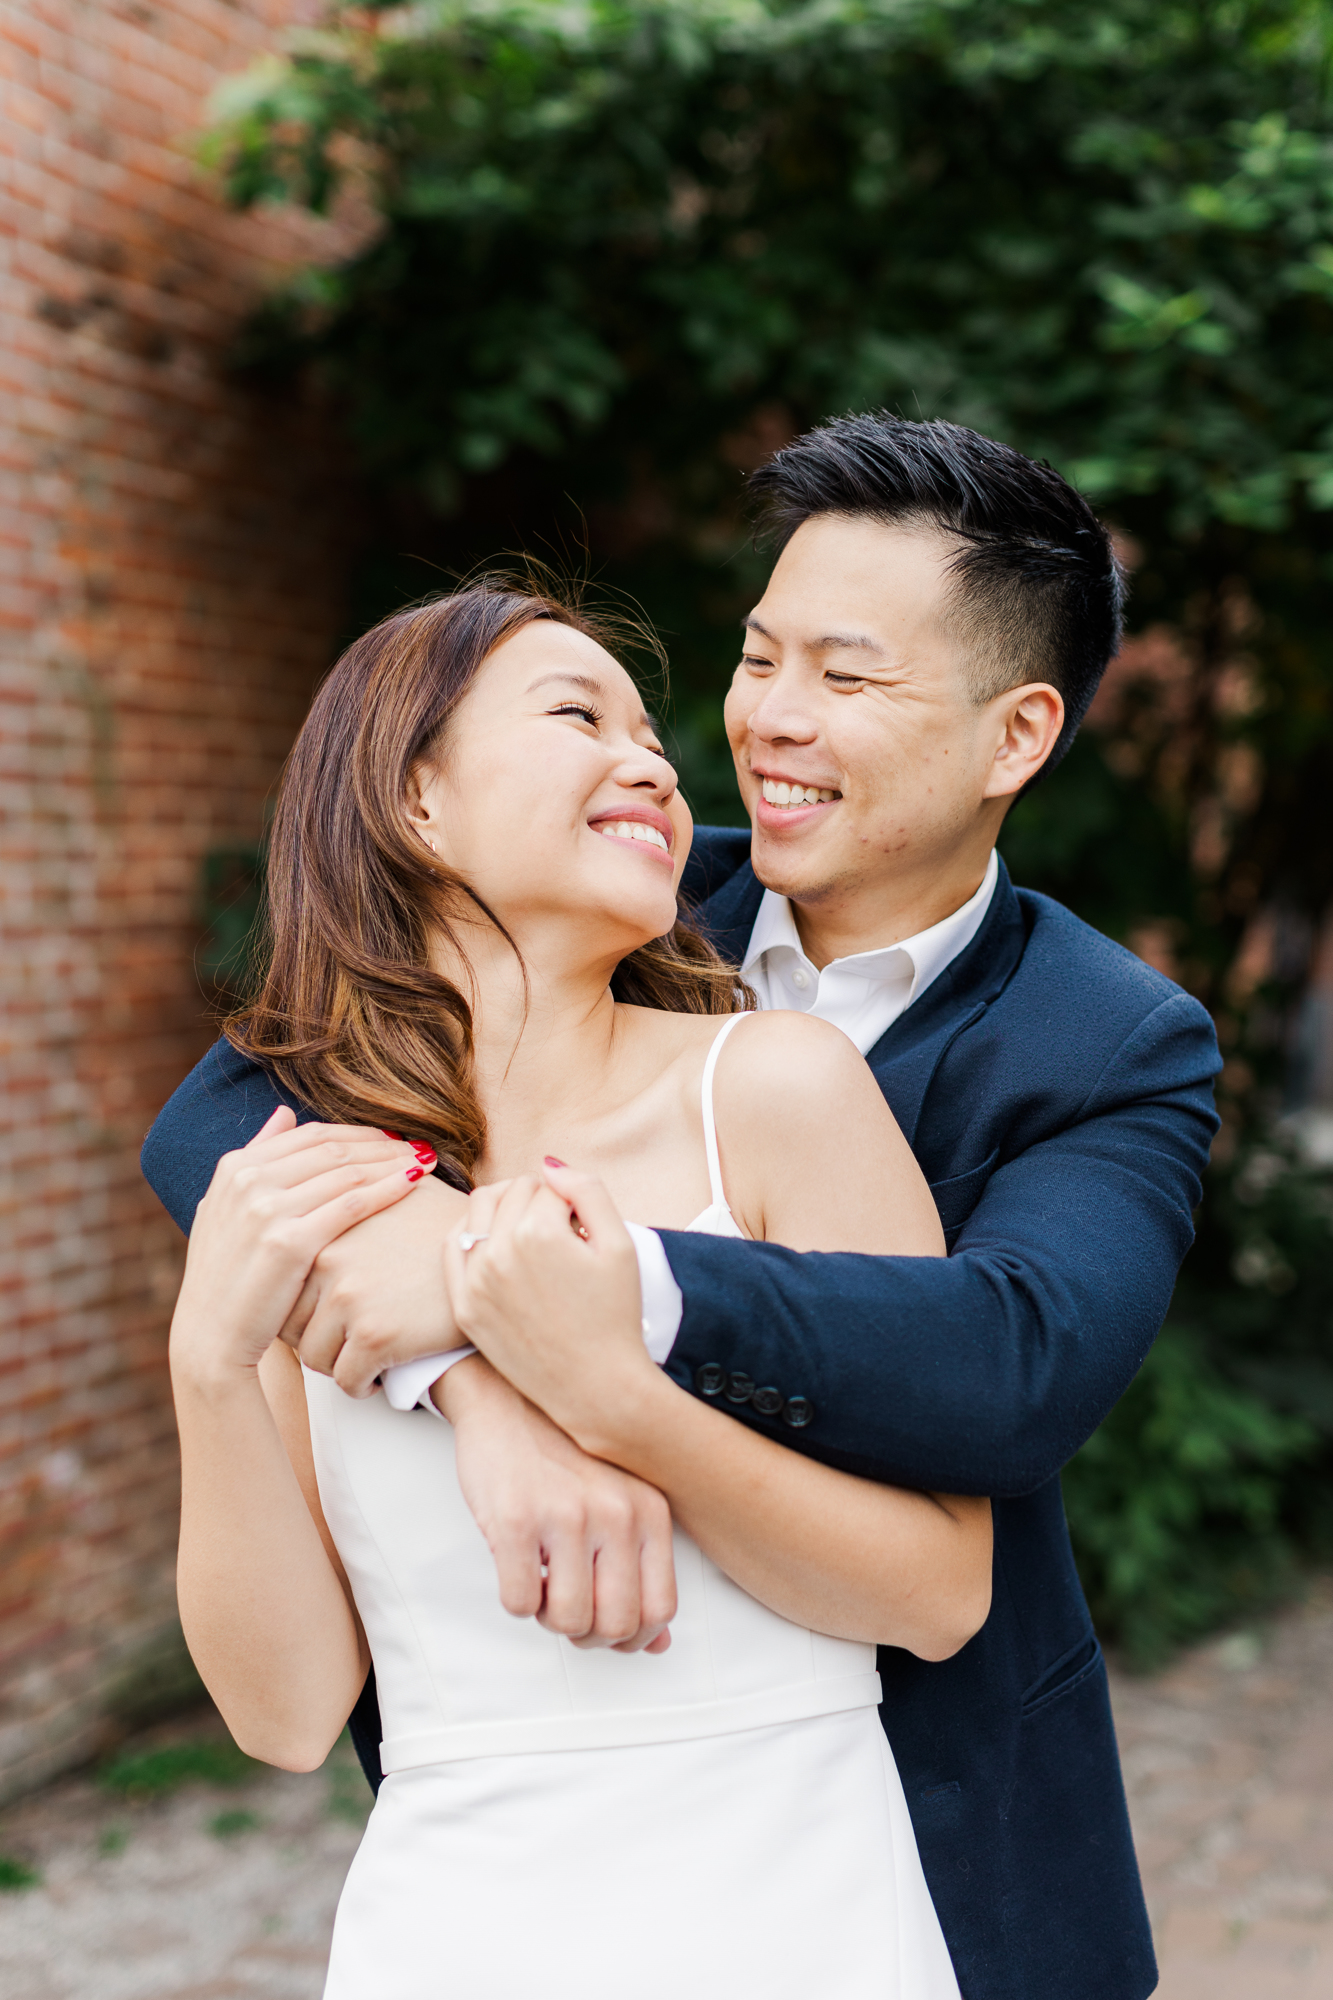 Gorgeous NYC Engagement Photography with Spring Blossoms